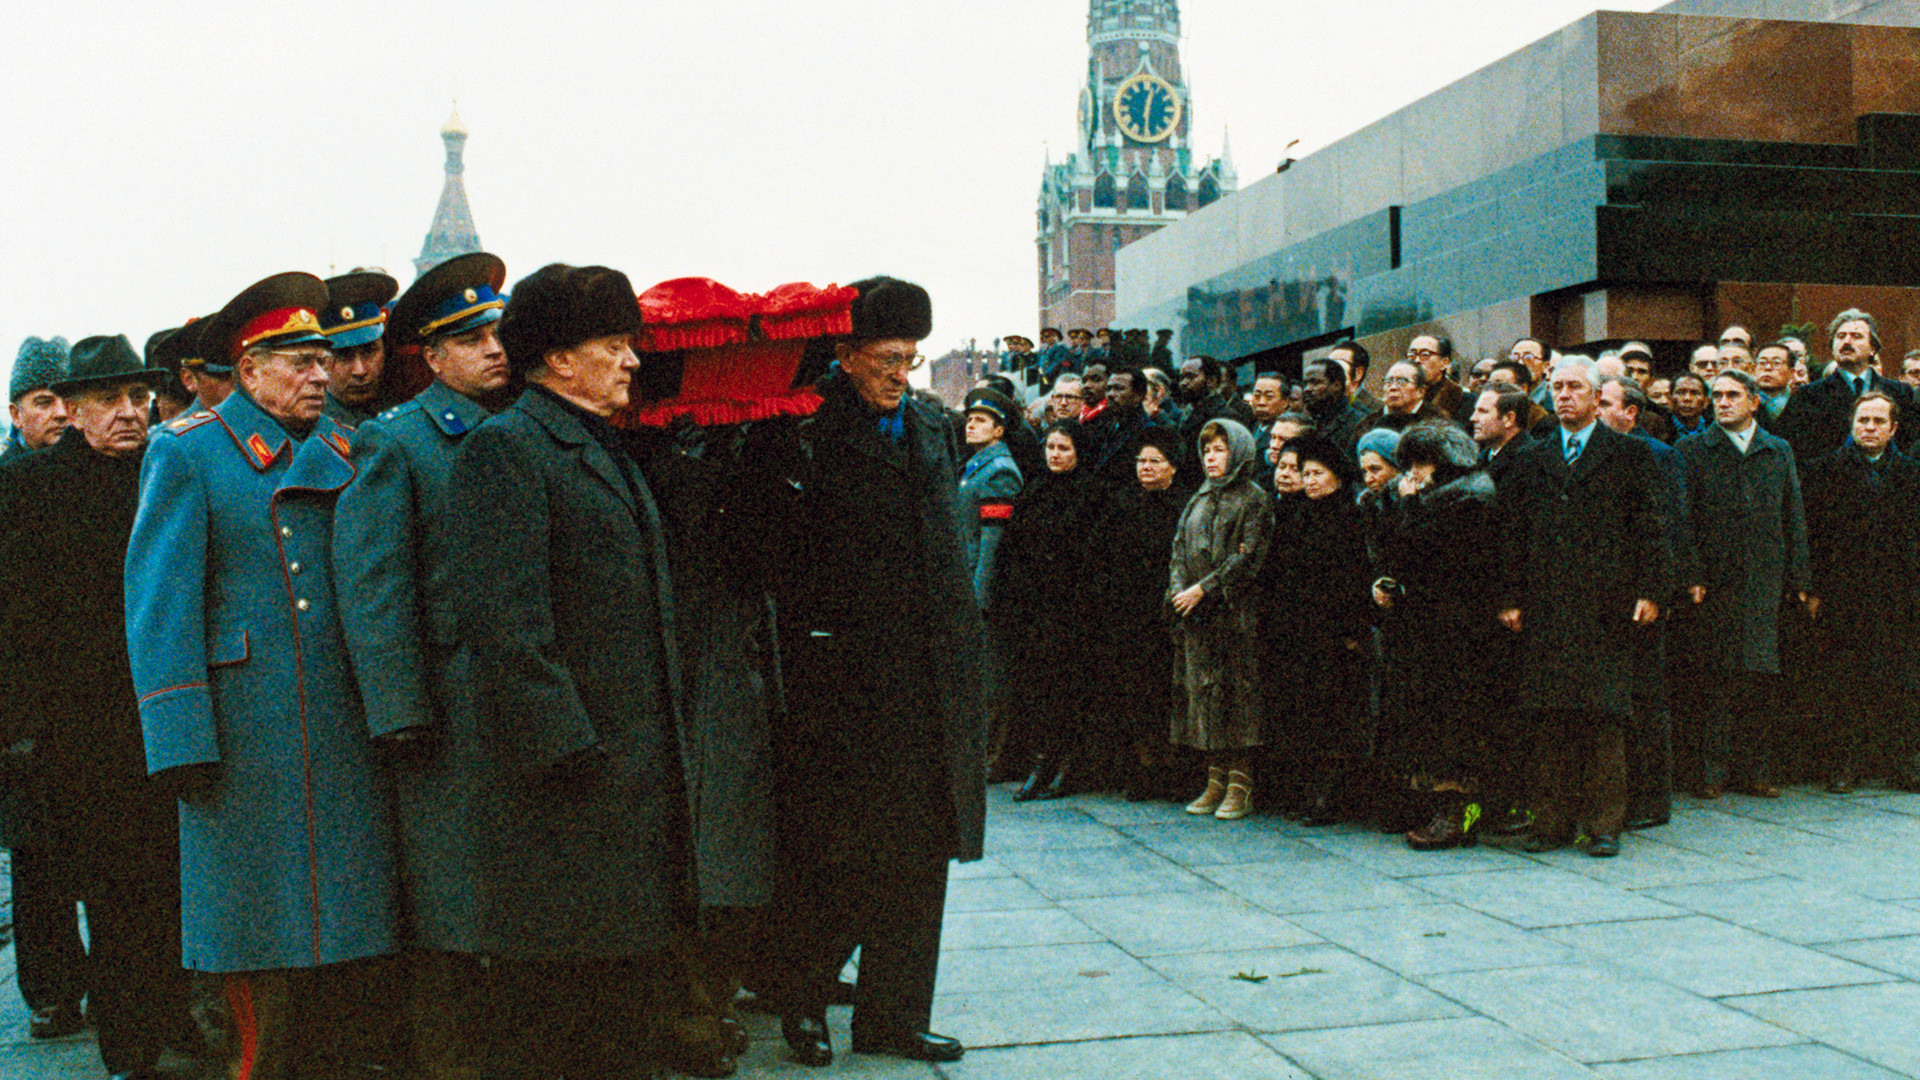 Leaders of the Communist Party of Russia bear the casket of Leonid Brezhnev, former Communist Party leader, in front of the Tomb of Lenin in Red Square during the funeral procession.